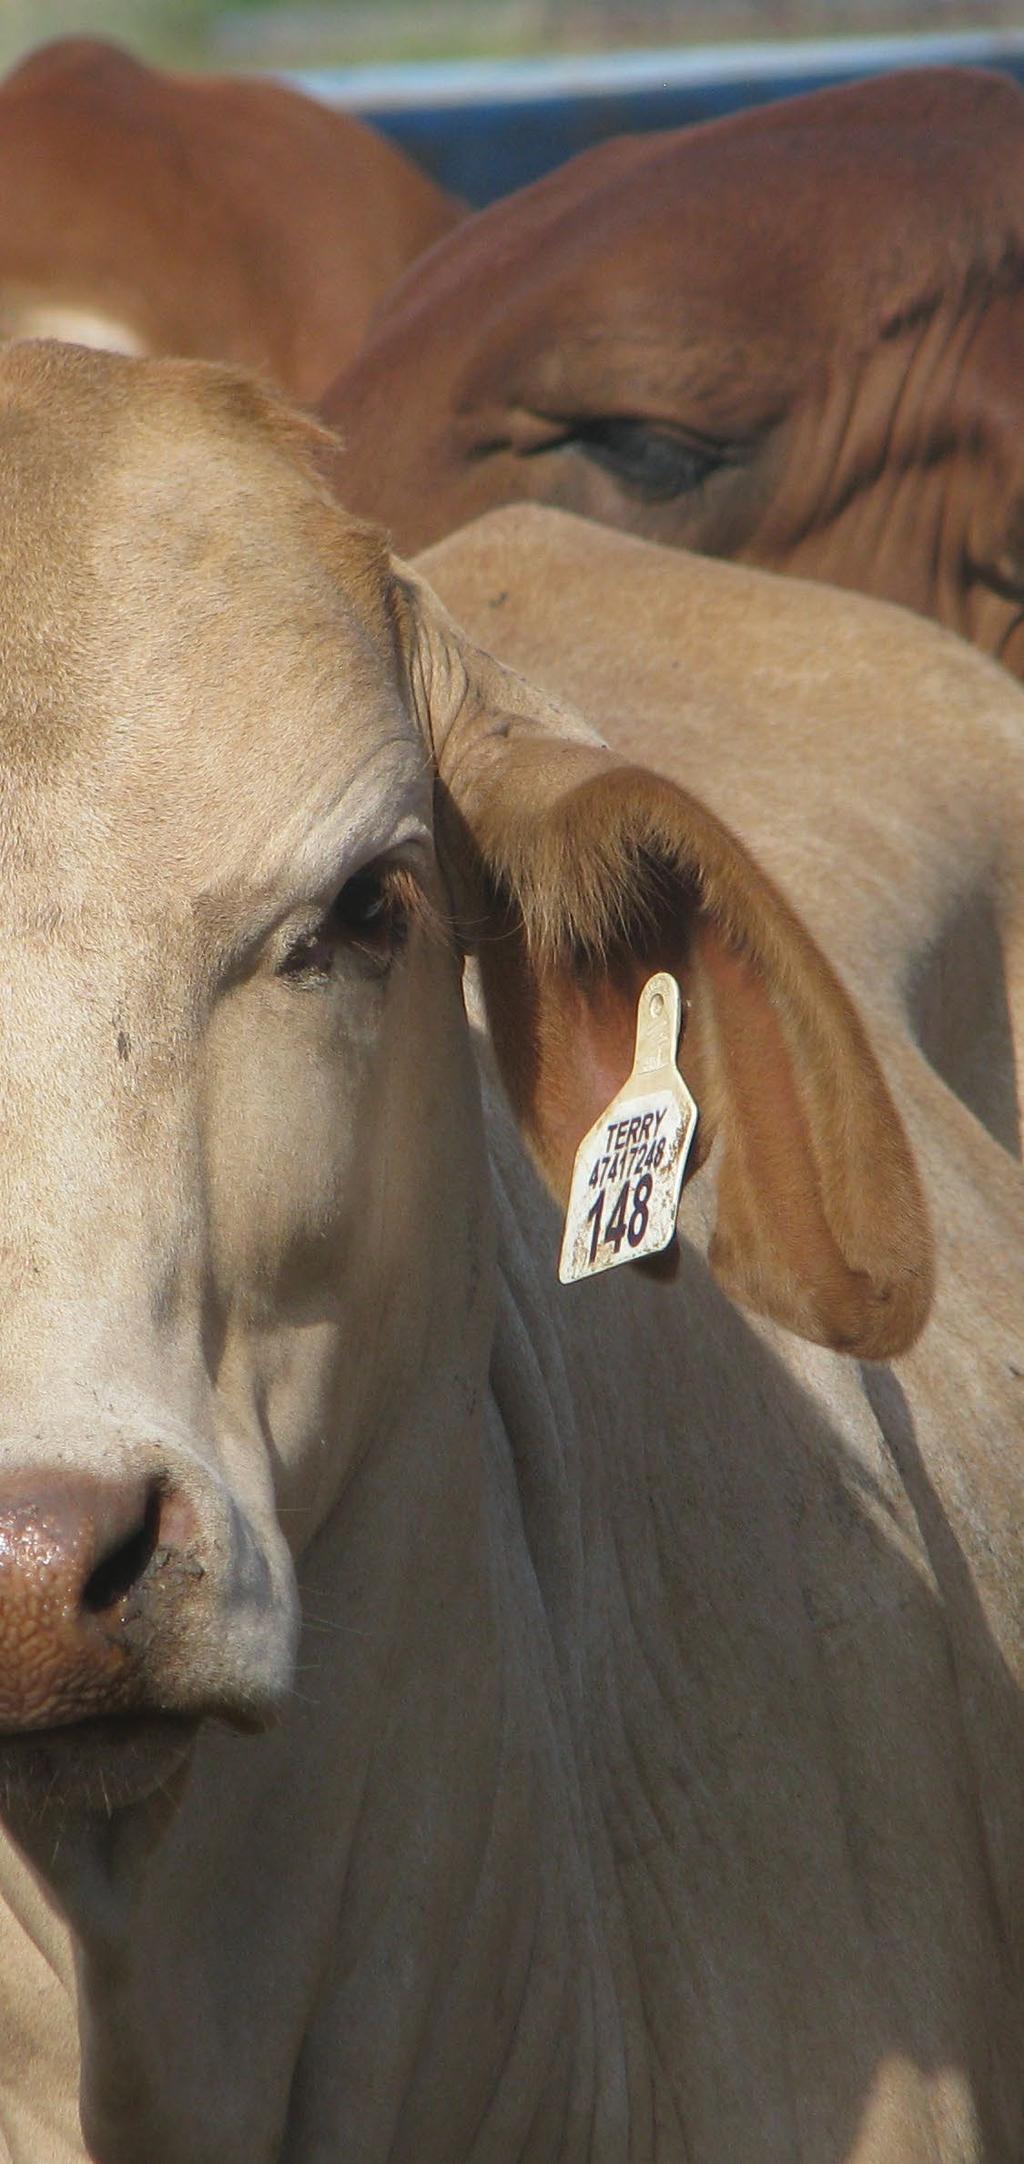 NLIS TAGS For cattle Superior retention Unsurpassed ease of application Outstanding readability Consistent EID readability performance Protected transponder enhances readability The flexible material